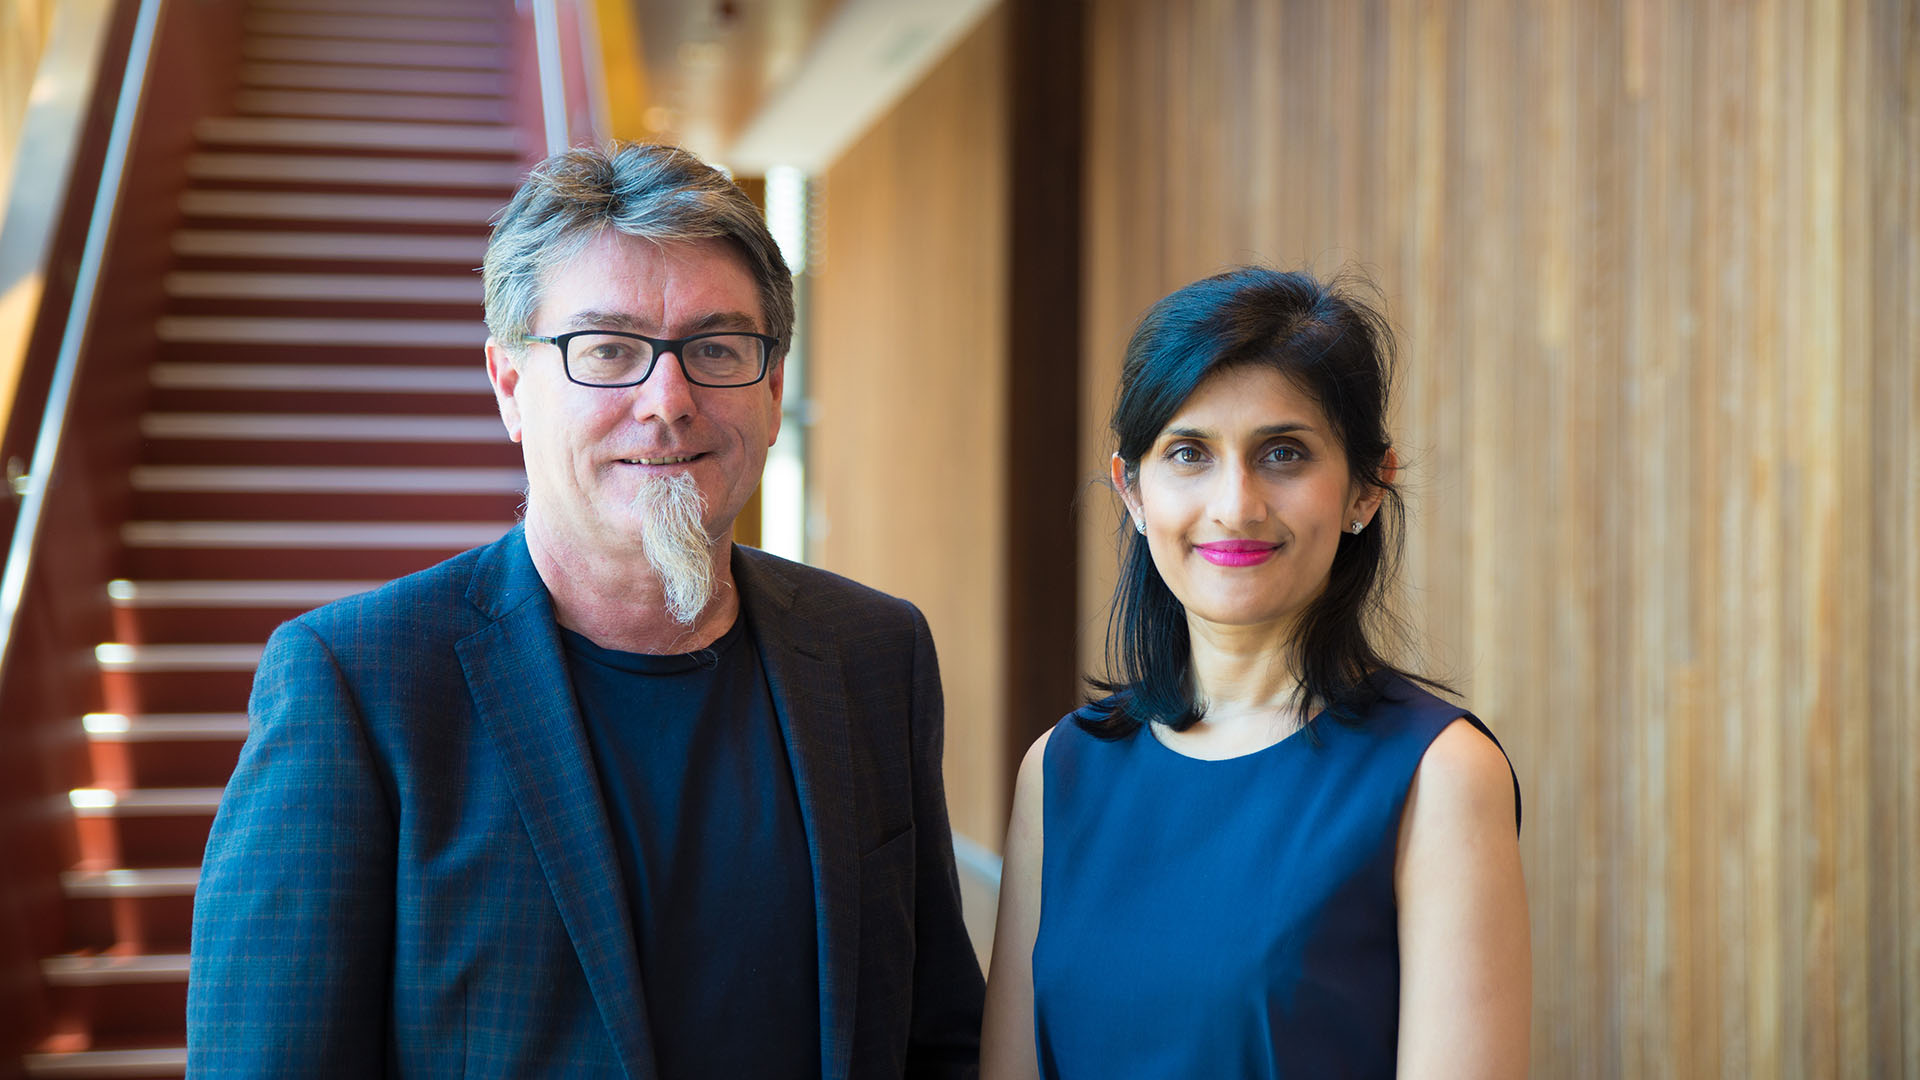 Distinguished Professor Gordon Wallace from the University of Wollongong’s (UOW) Intelligent Polymer Research Institute (IPRI) with Ear, Nose and Throat surgeon Associate Professor Payal Mukherjee, from the Royal Australasian College of Surgeons.